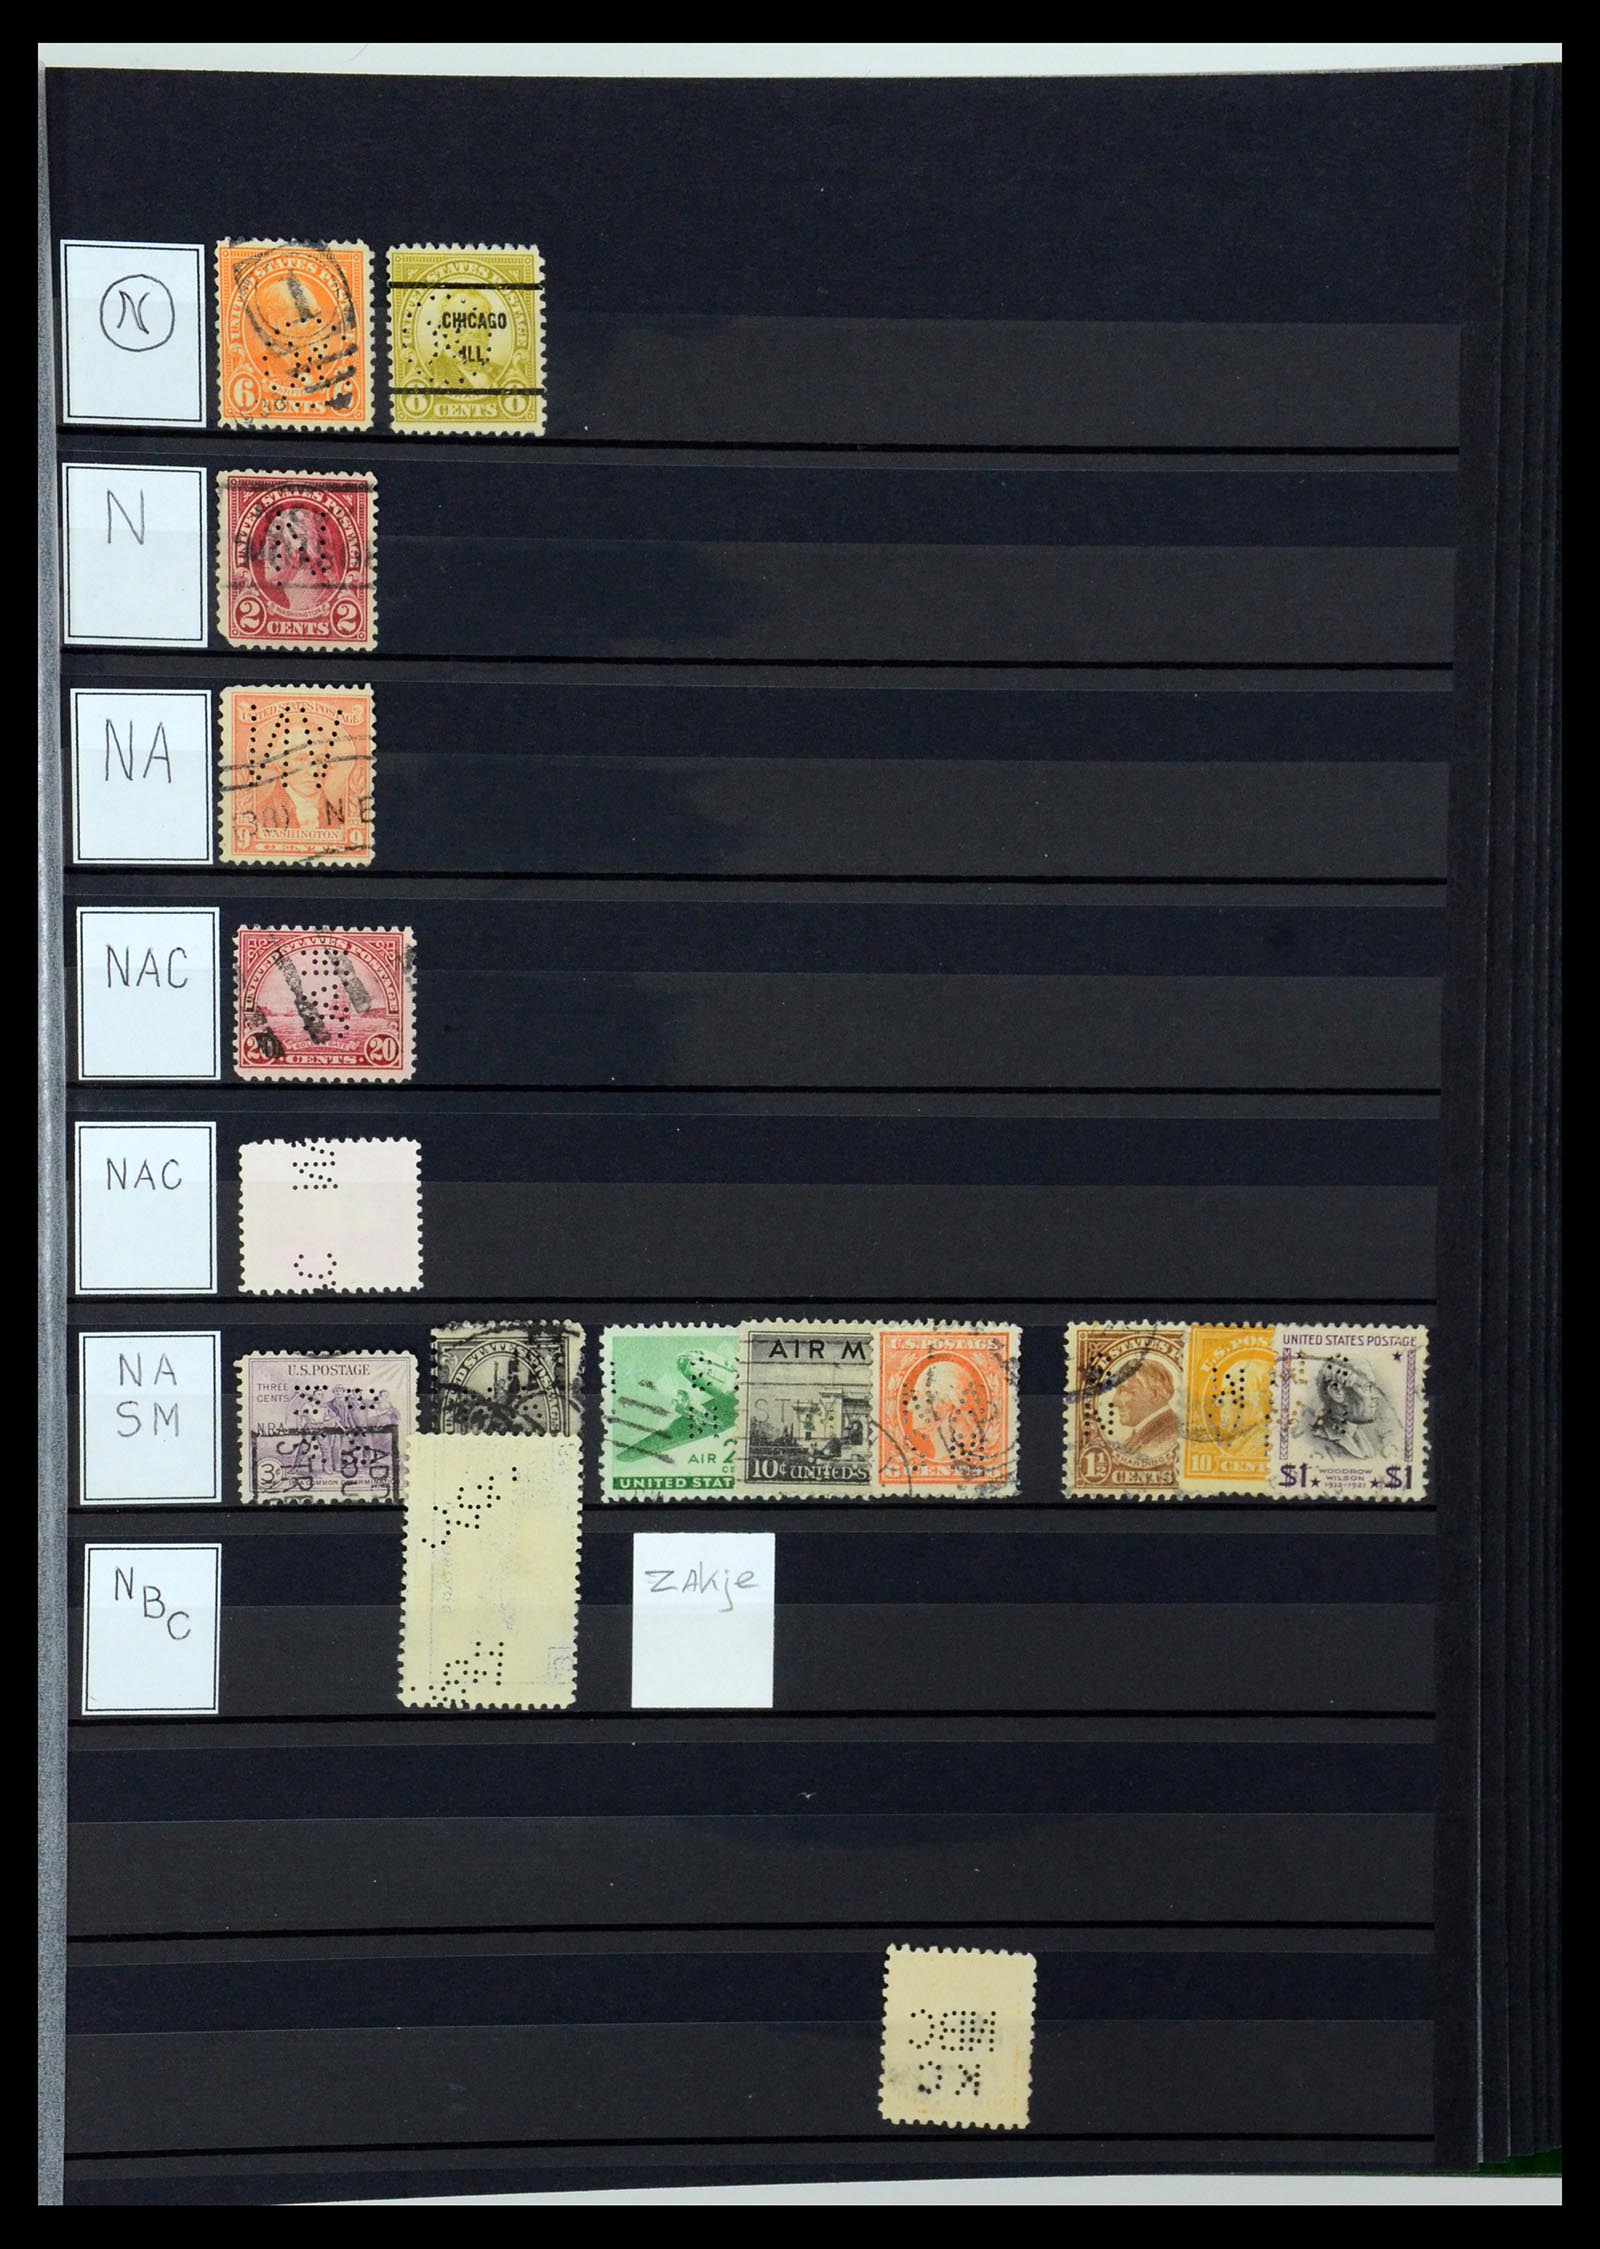 36388 093 - Stamp collection 36388 USA perfins.